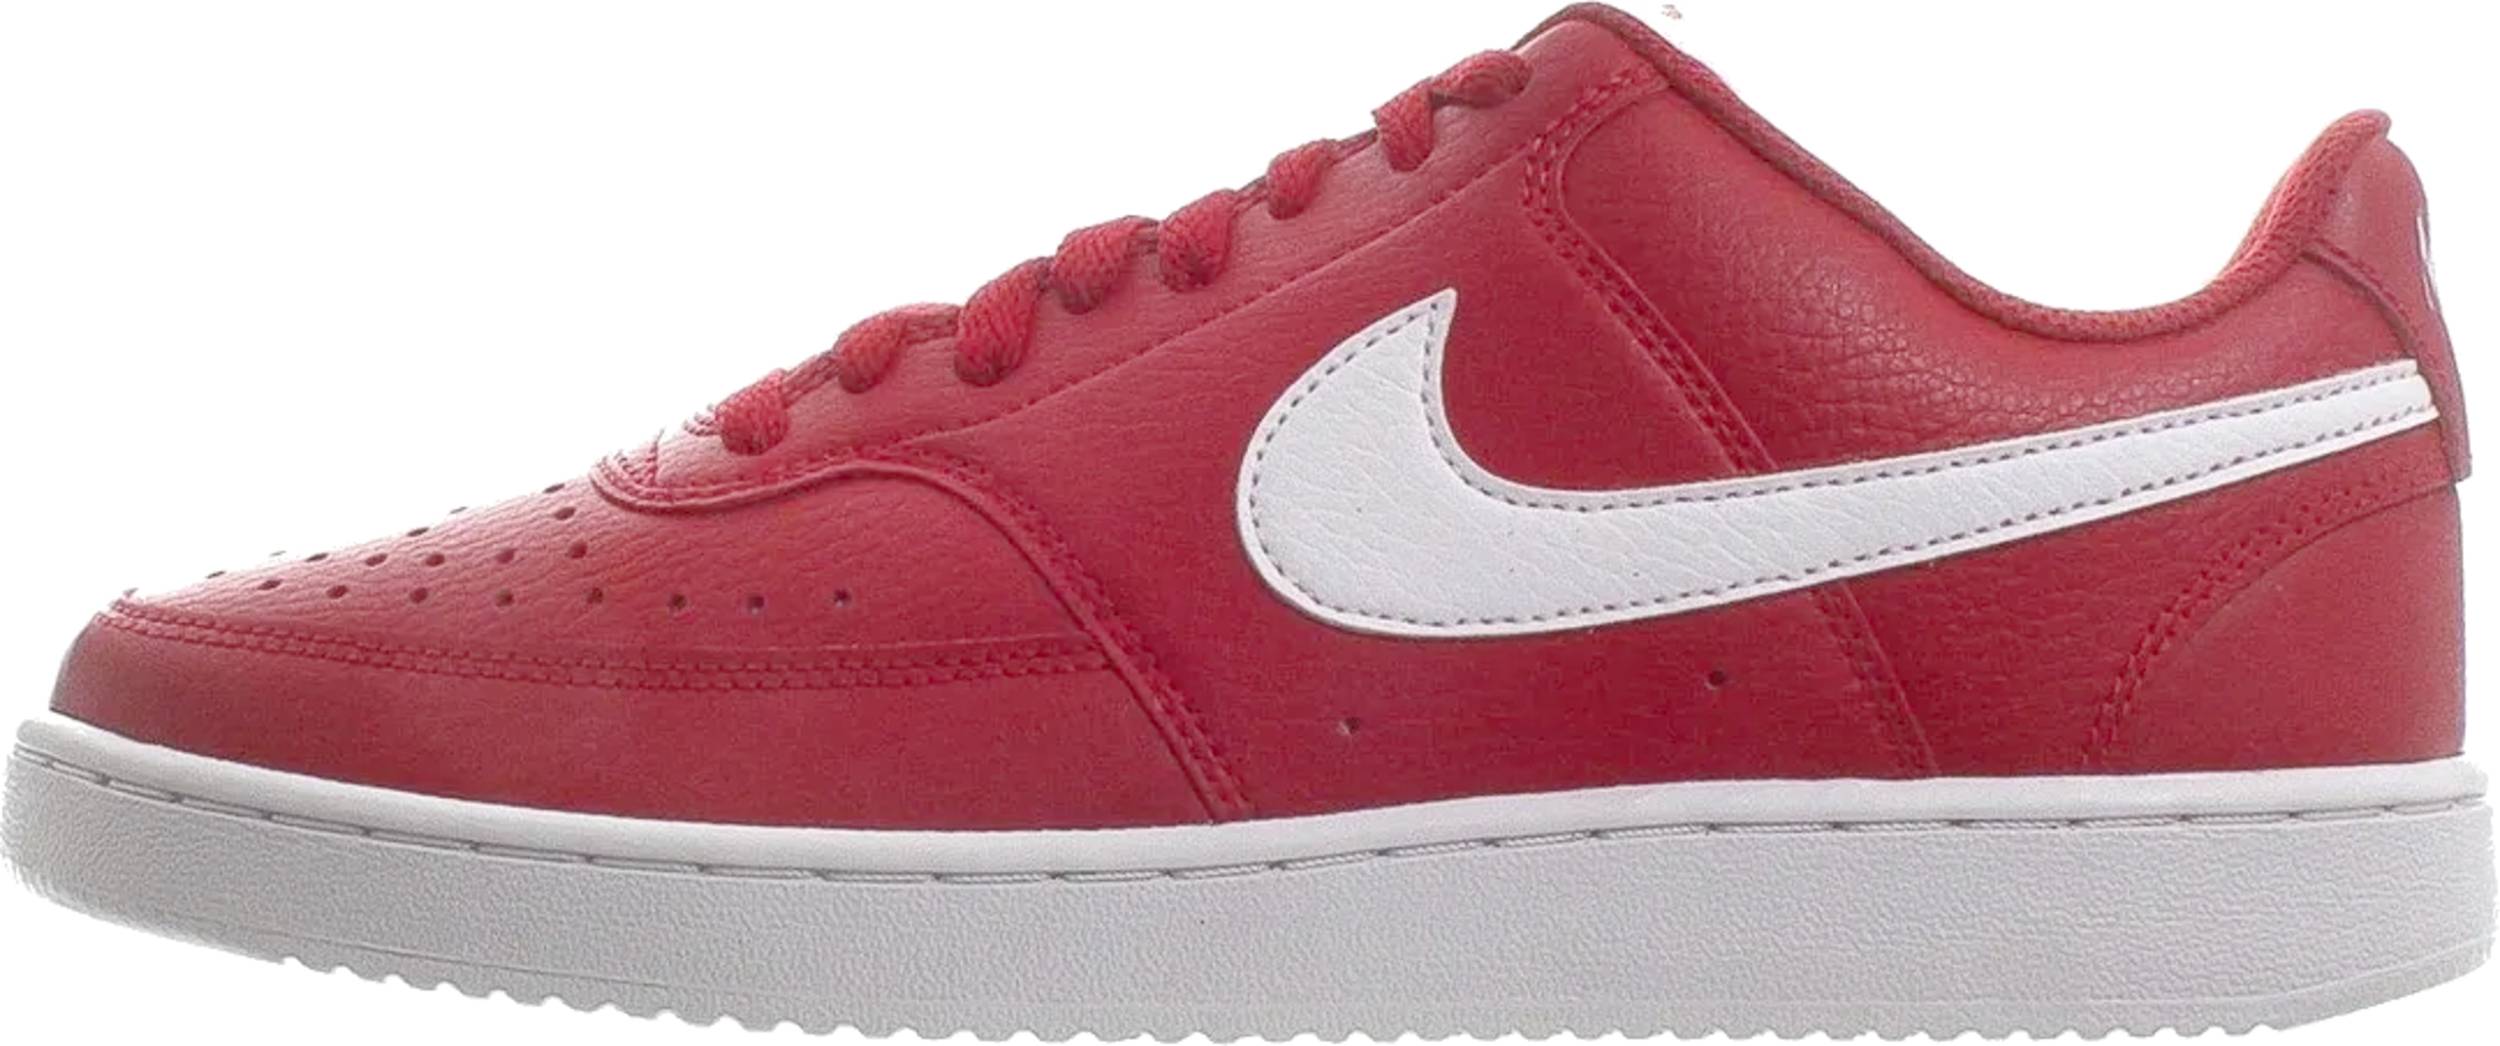 nike shoes with red swoosh